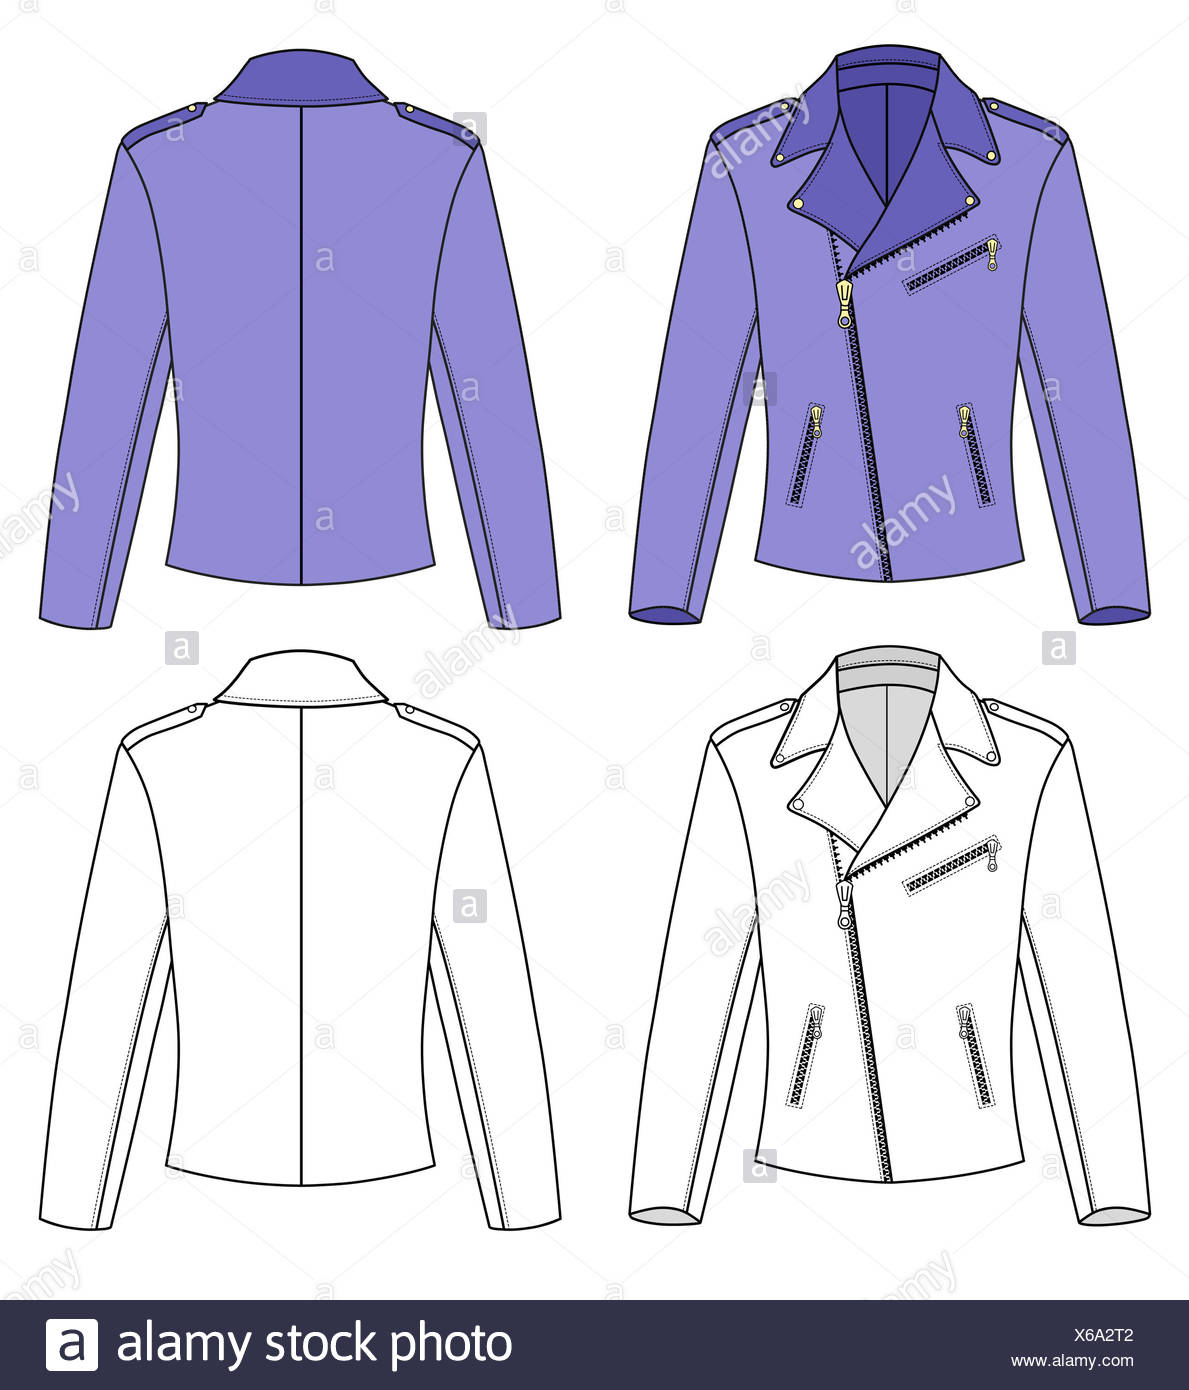 Outline Jacket Illustration High Resolution Stock Photography and ...